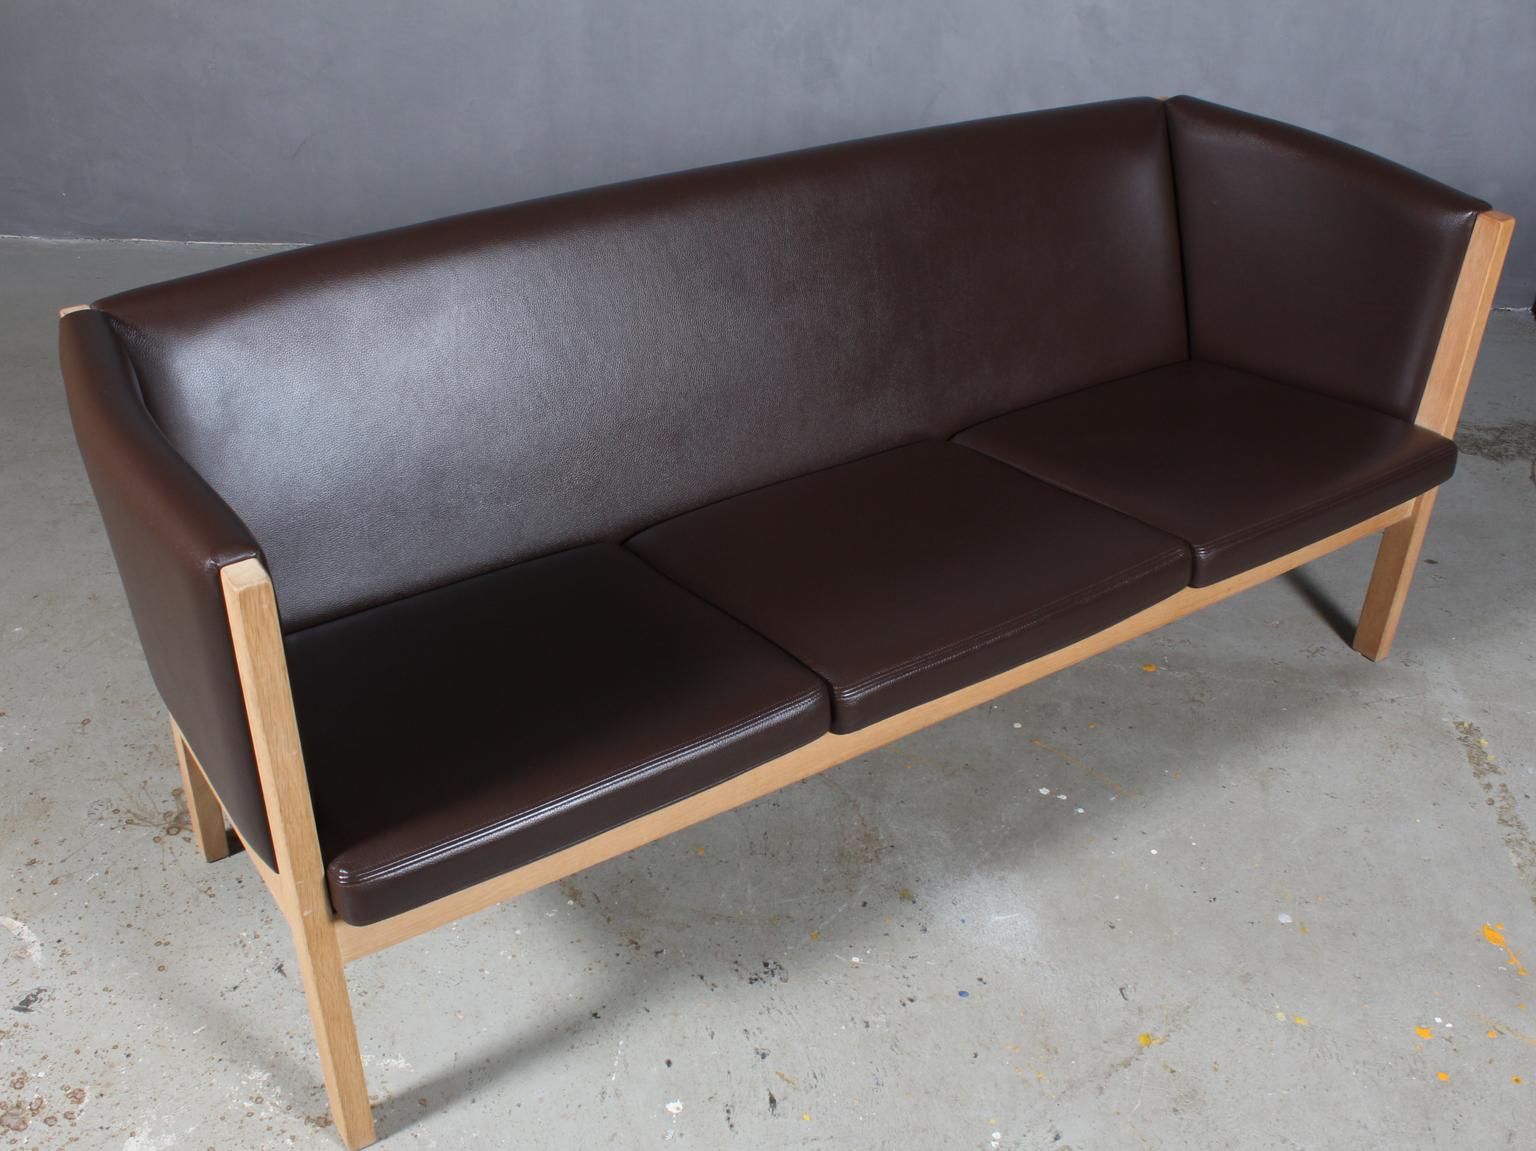 Hans J. Wegner three-seat sofa original upholstered with brown semi aniline leather.

Frame of solid soap treated oak.

Model 285 / 3, made by GETAMA.